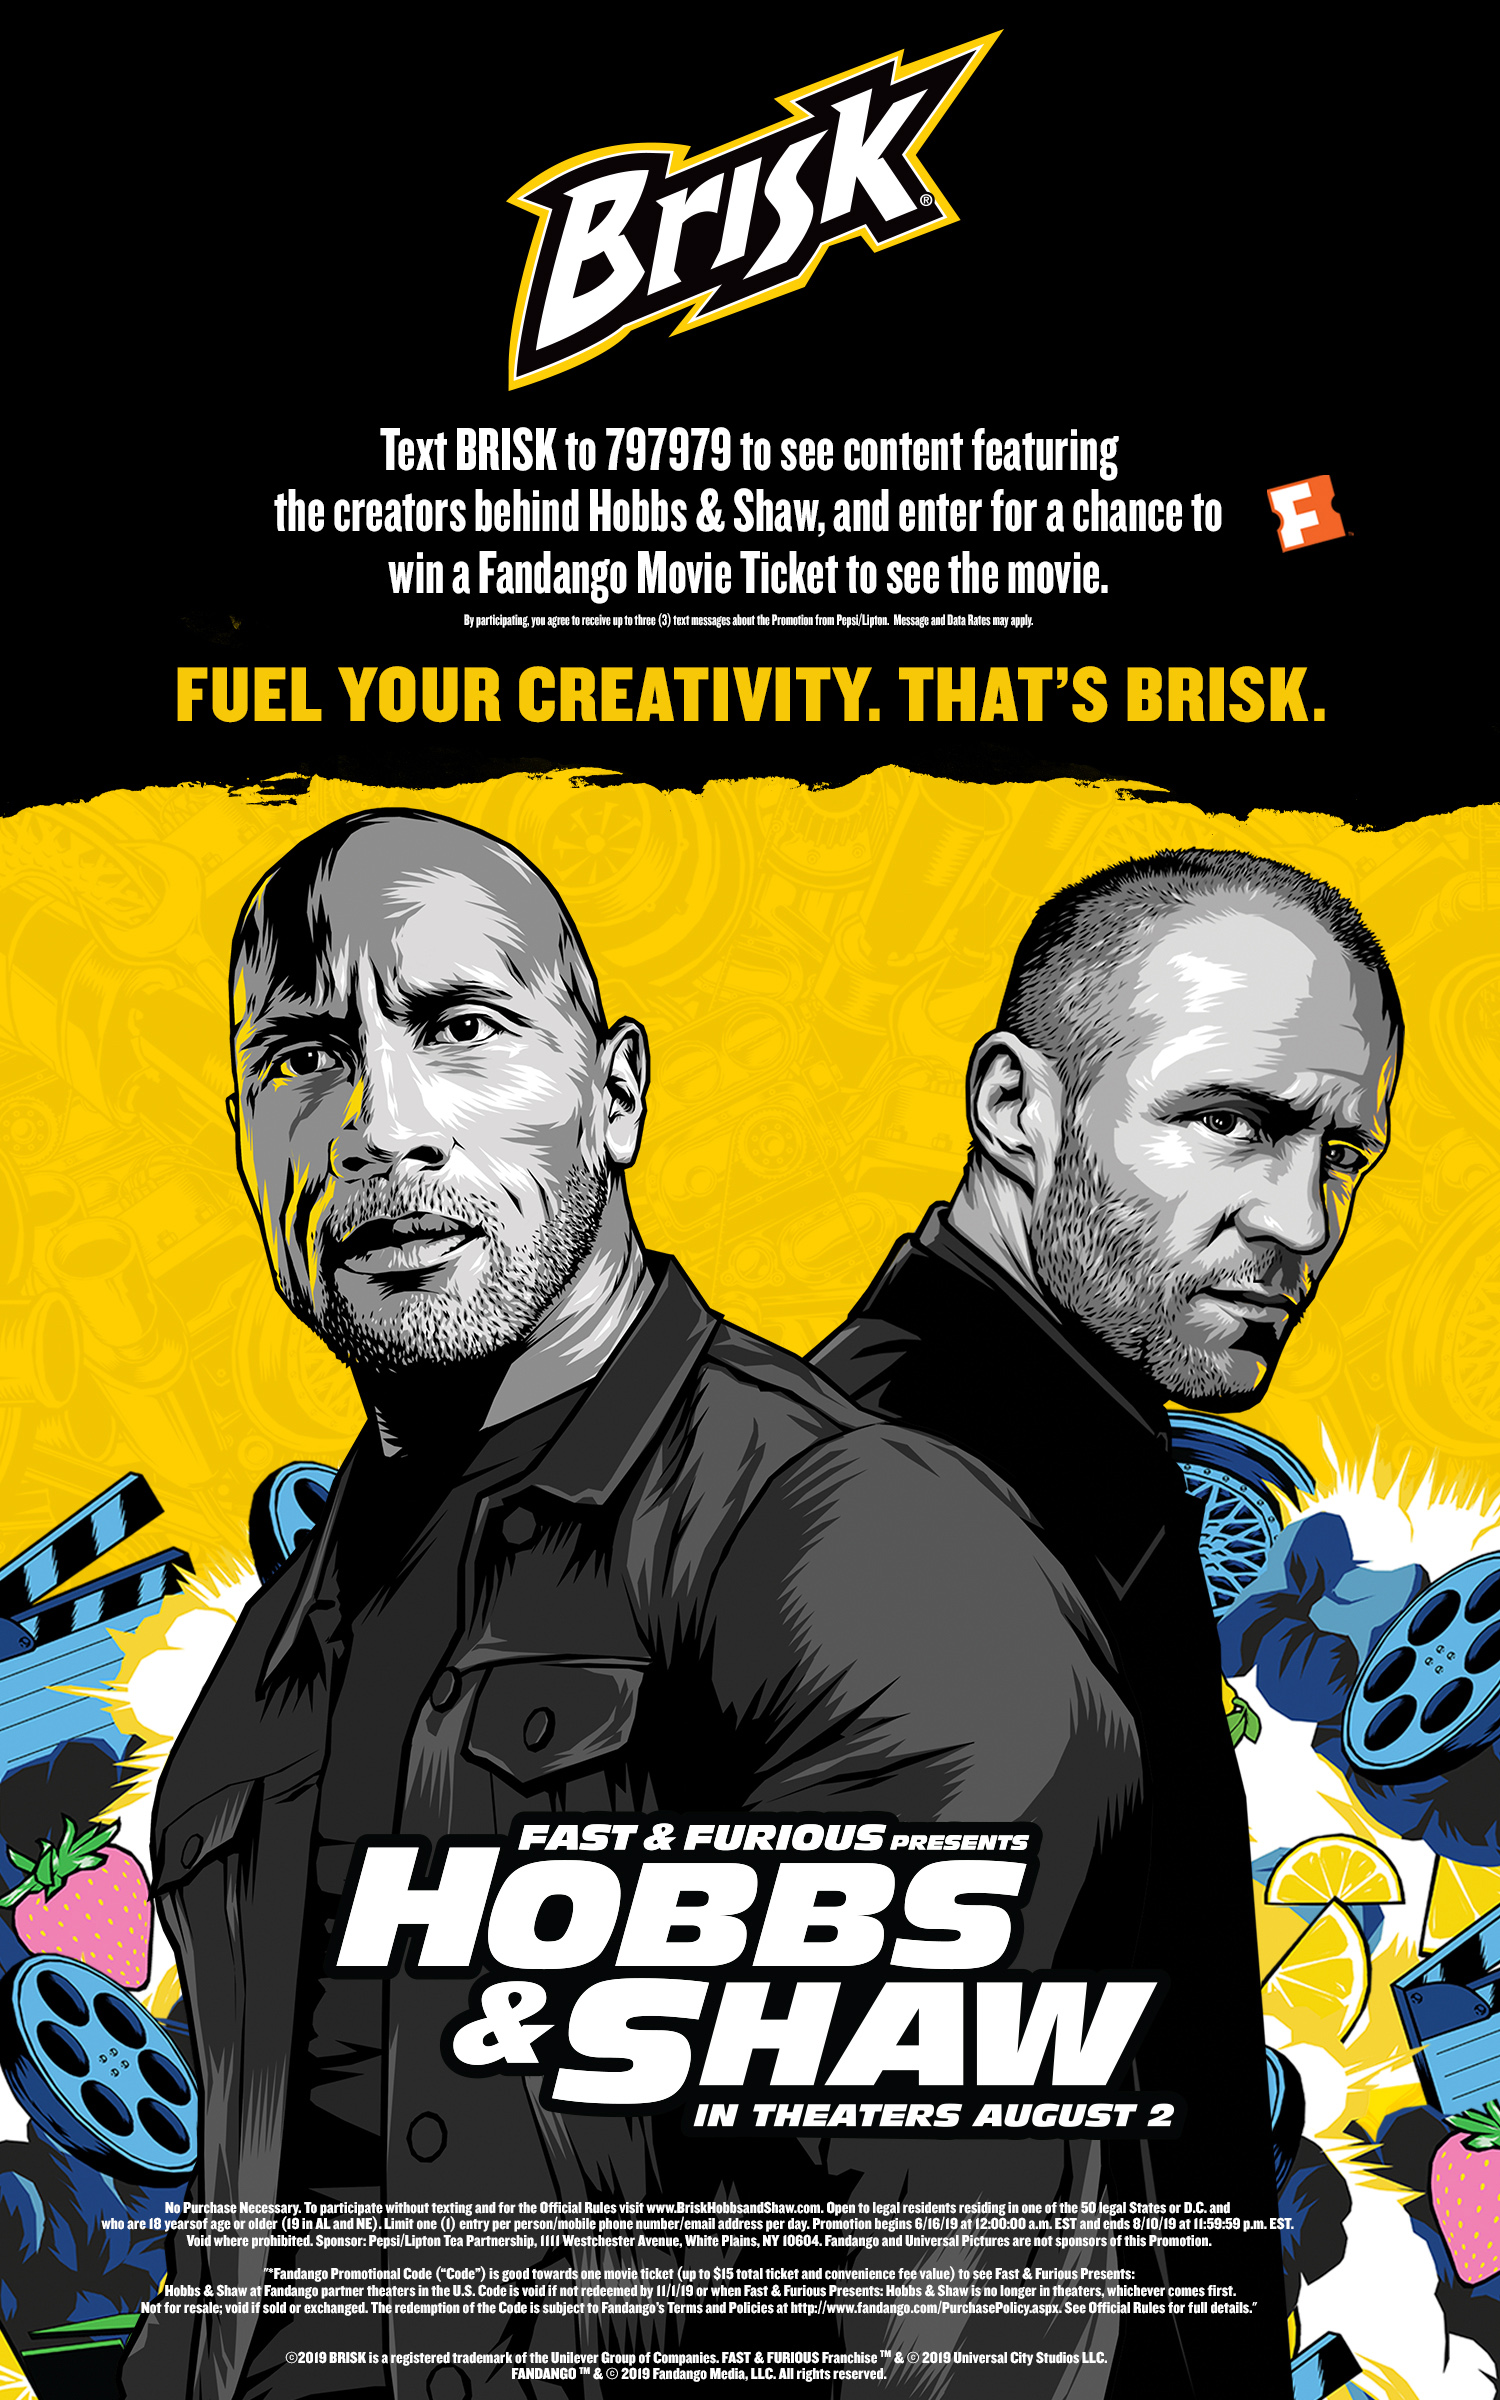 “Brisk Iced Tea and Universal Pictures’ “Fast & Furious Presents: Hobbs & Shaw” point of sale imagery